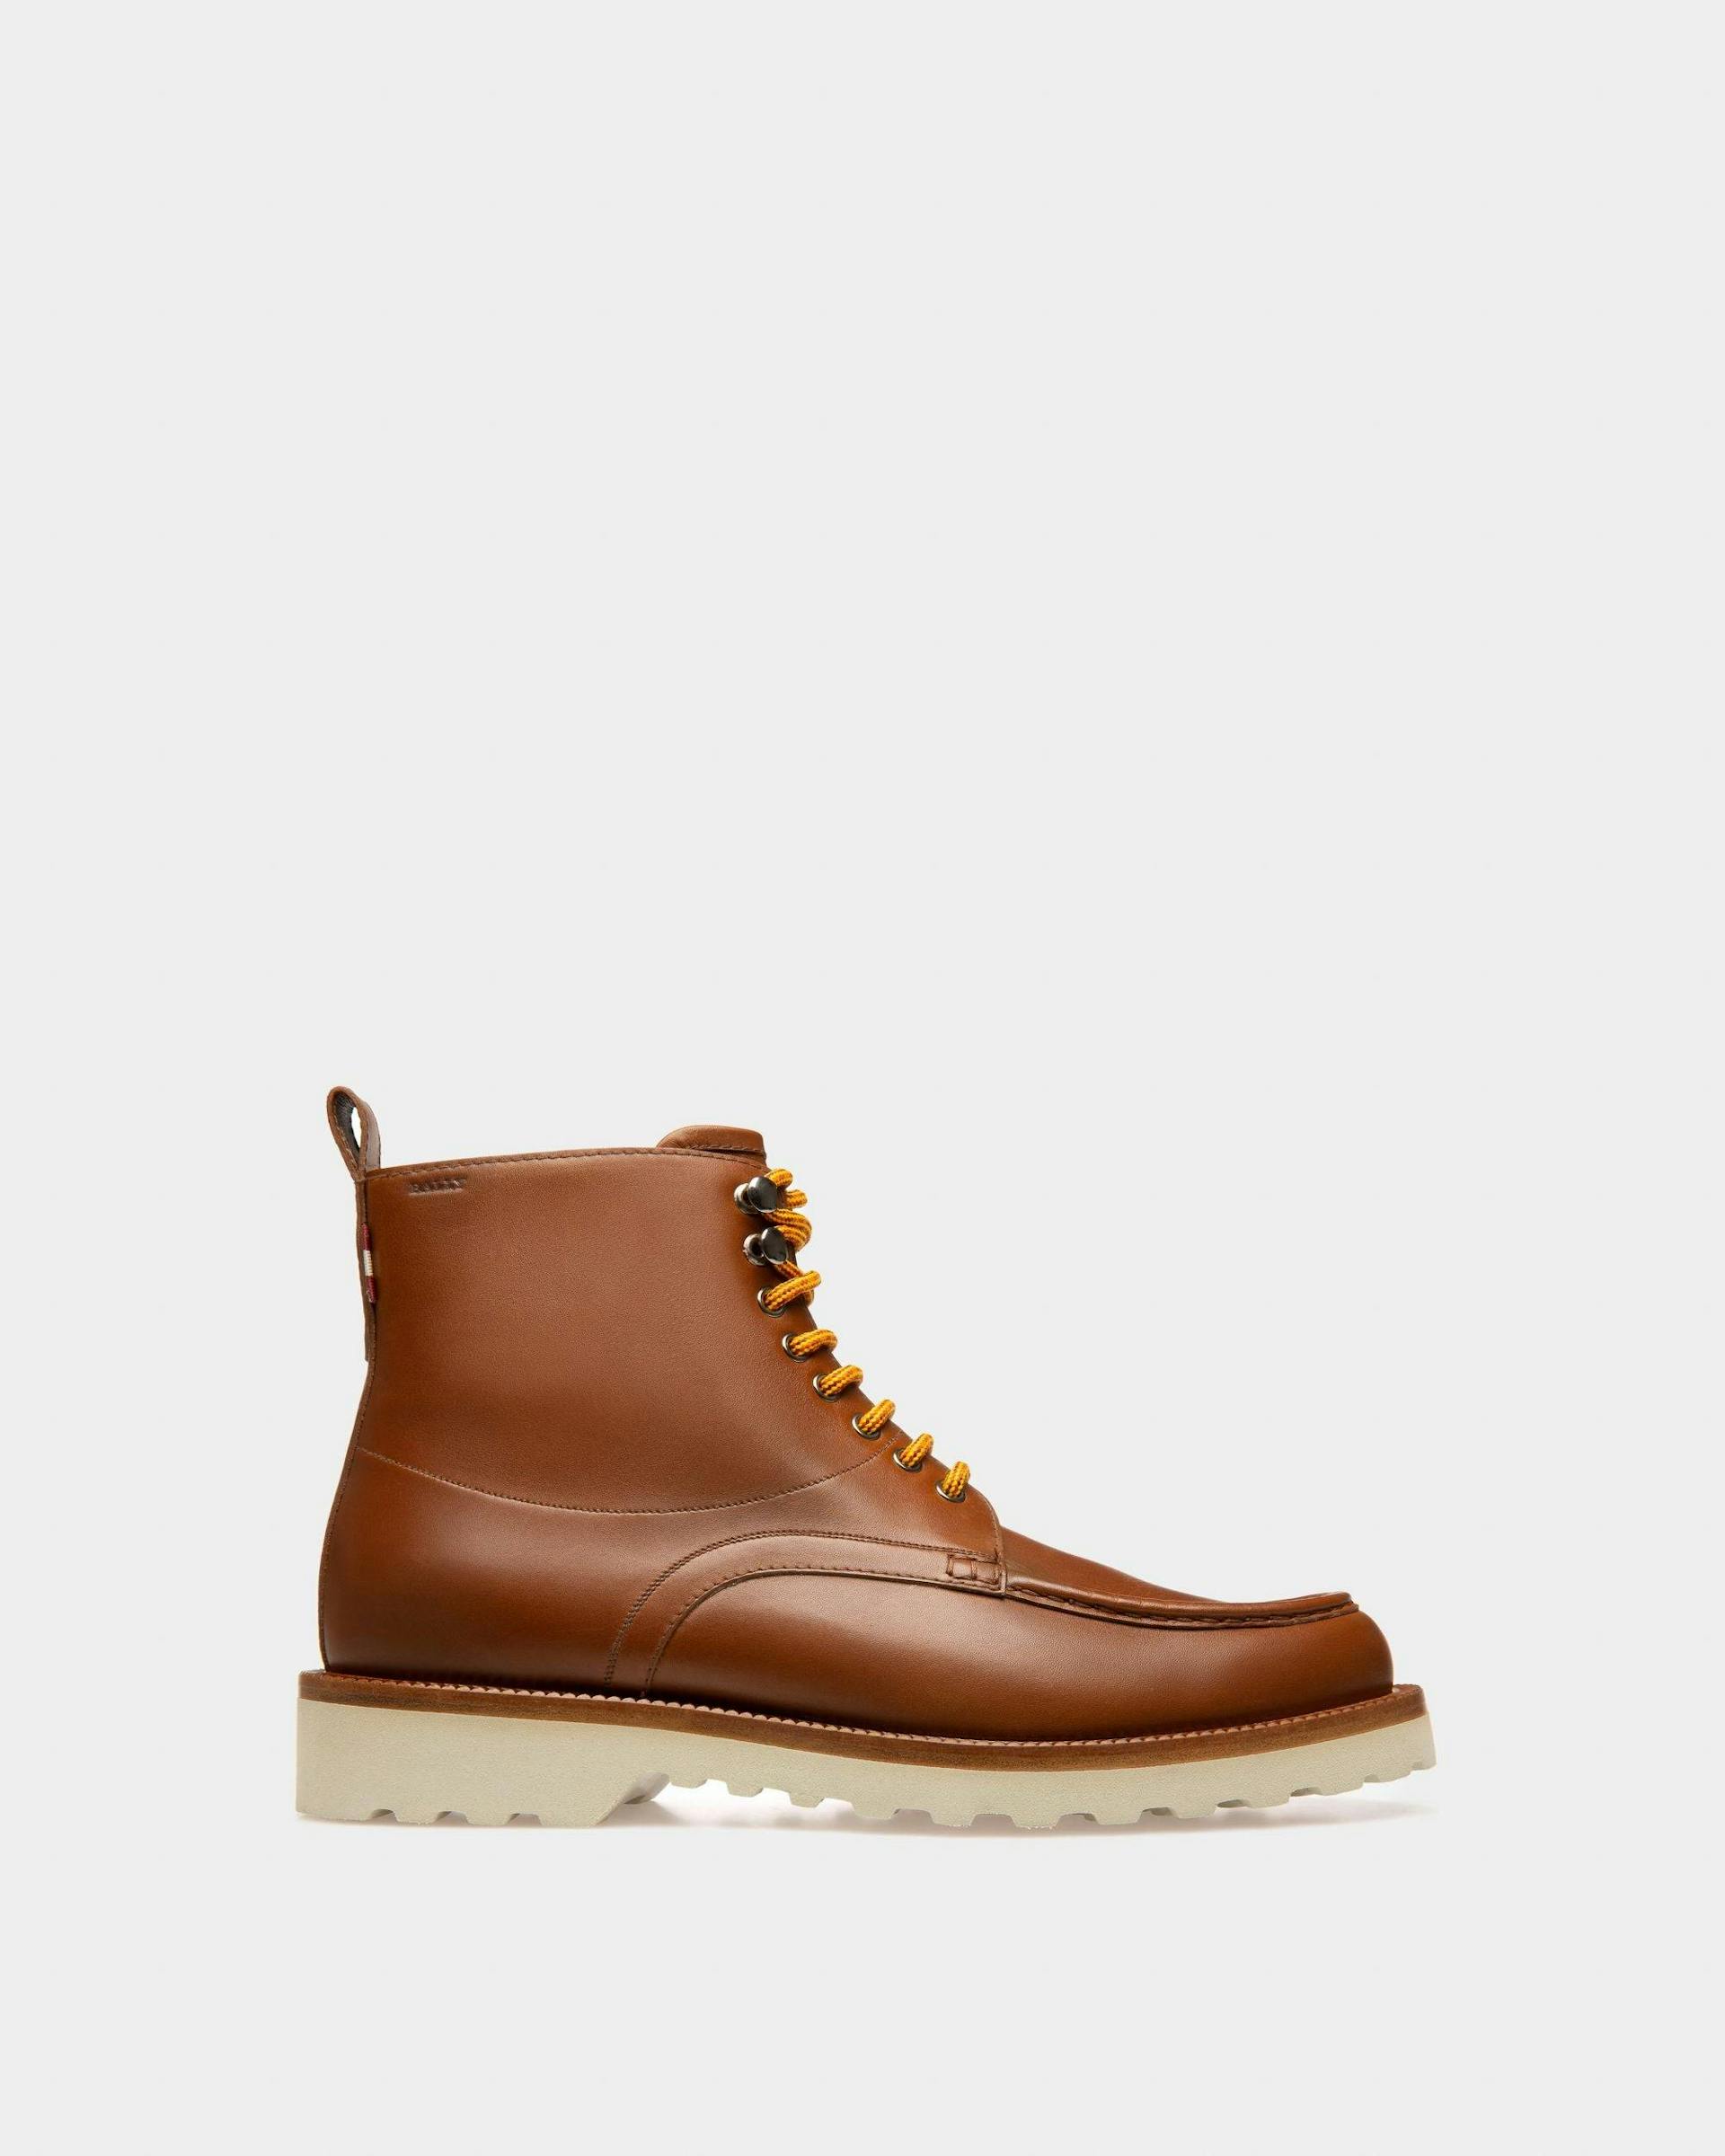 Nobilus Leather Boots In Brown - Men's - Bally - 01